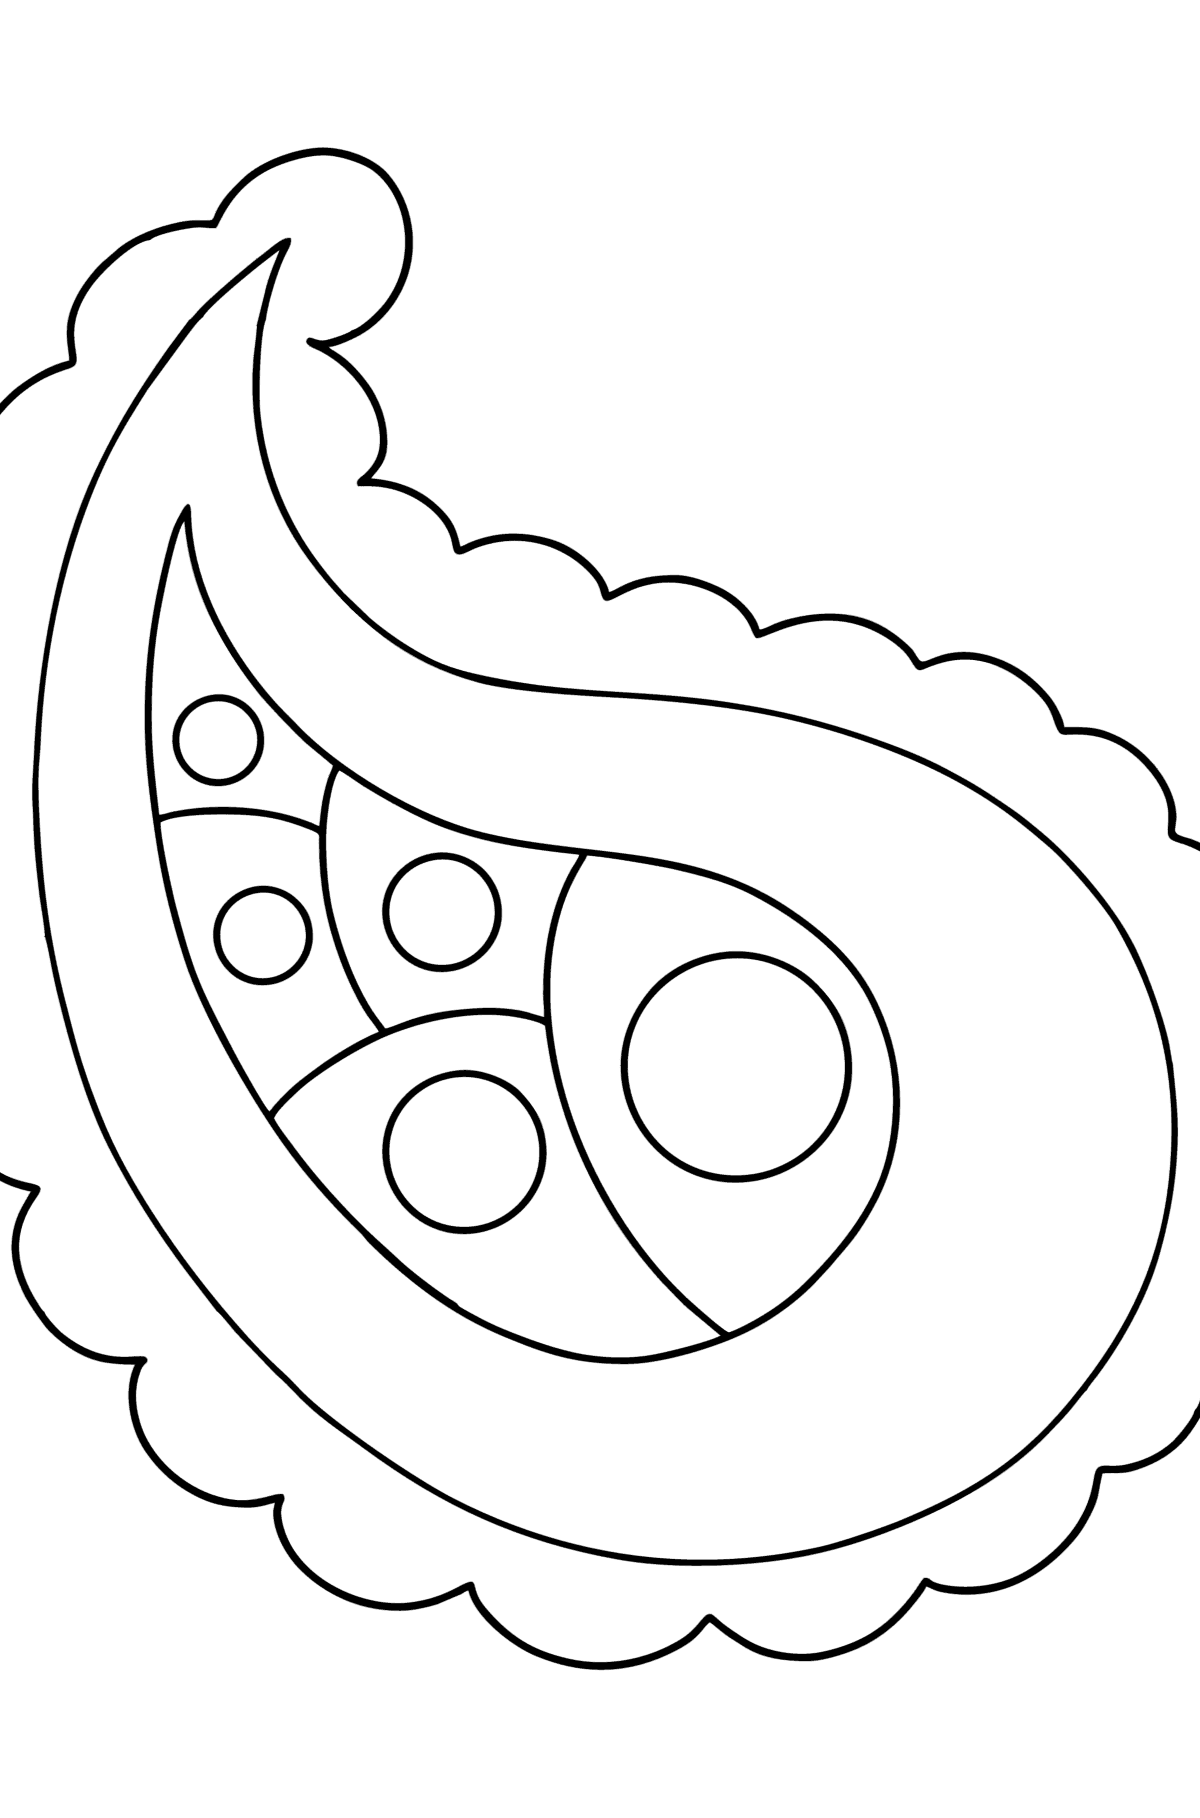 Kids Paisley coloring page - Coloring Pages for Kids